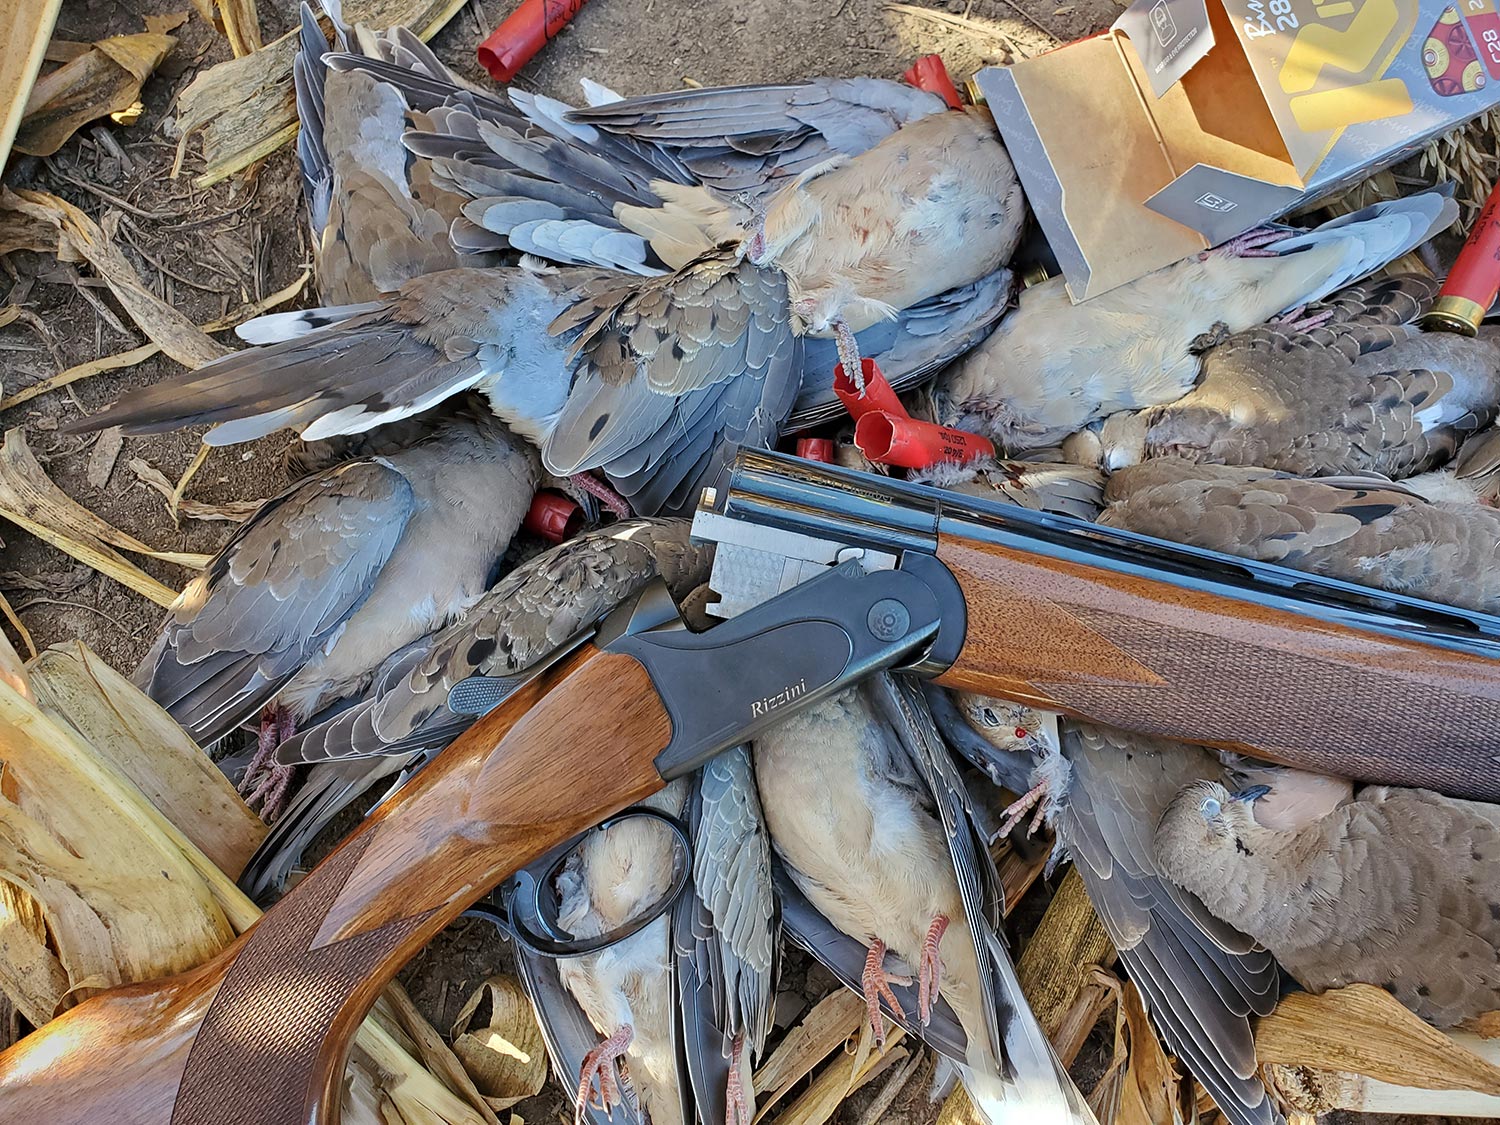 The author’s 28-gauge Rizzini over/under worked well for close-range decoying doves. But when the shots got tougher, he switched to a heavier 12-gauge.